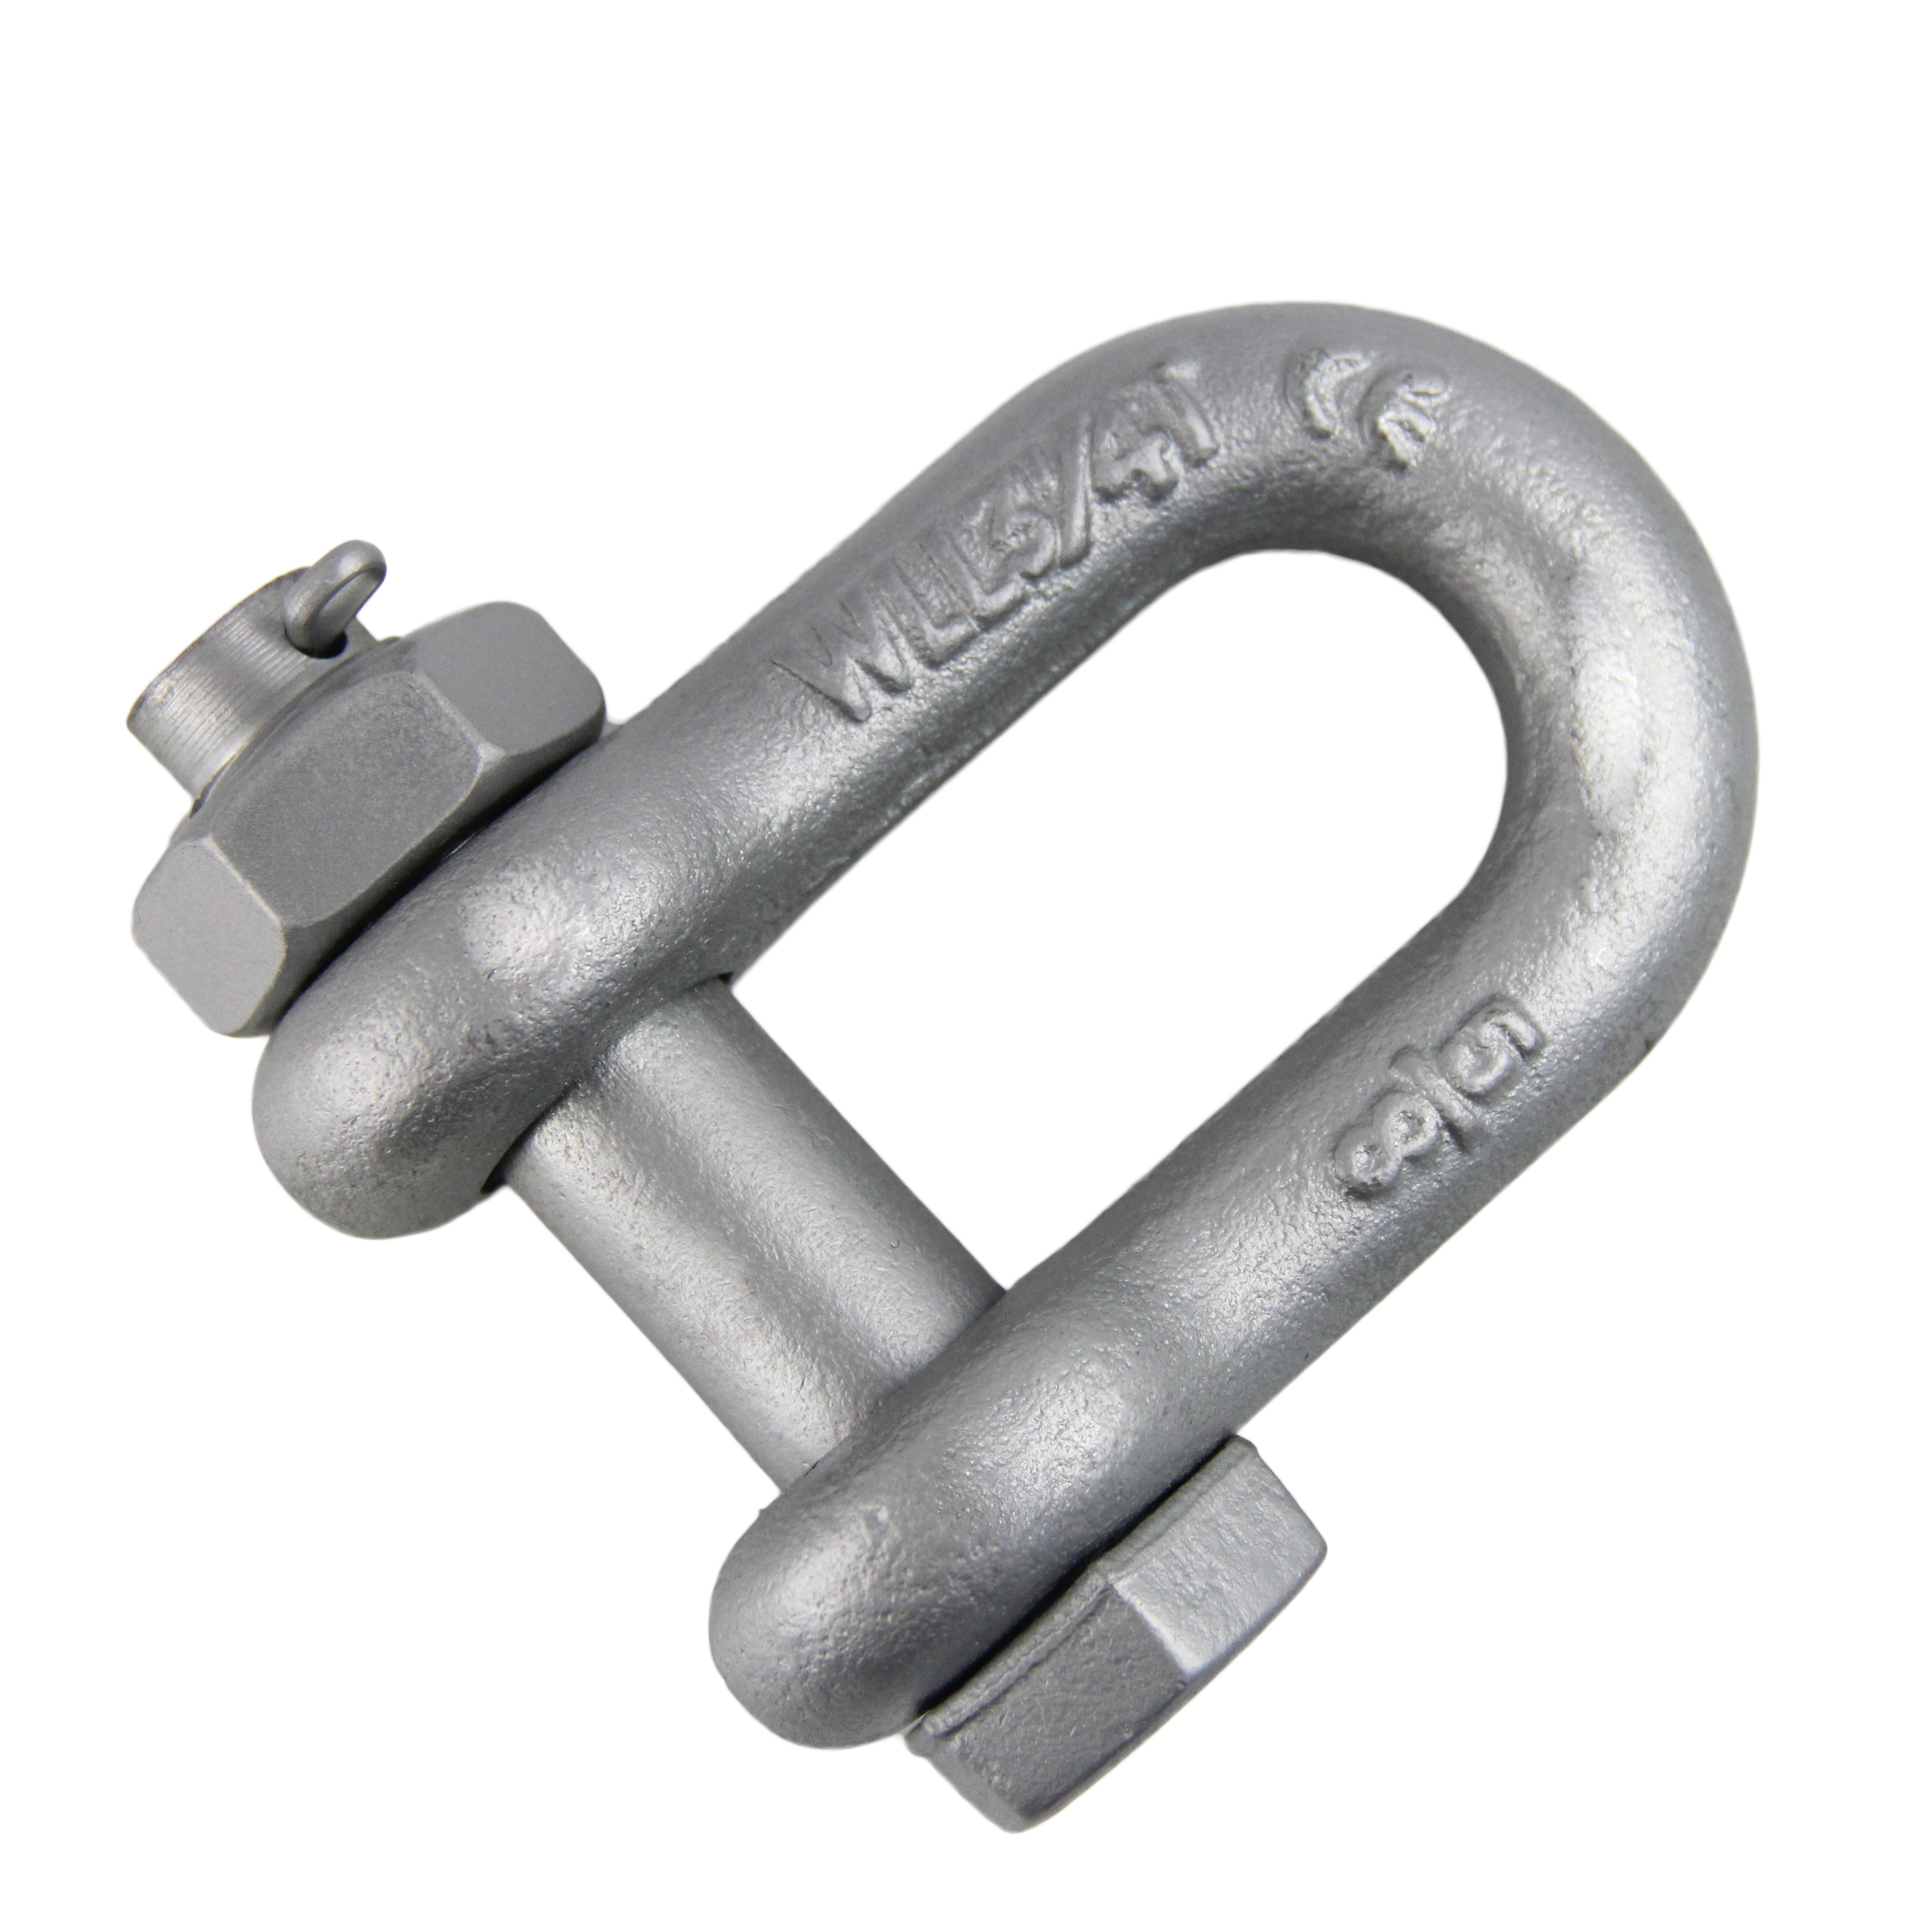 Thinkwell G2150 US Type Bolt Type Chain Shackle